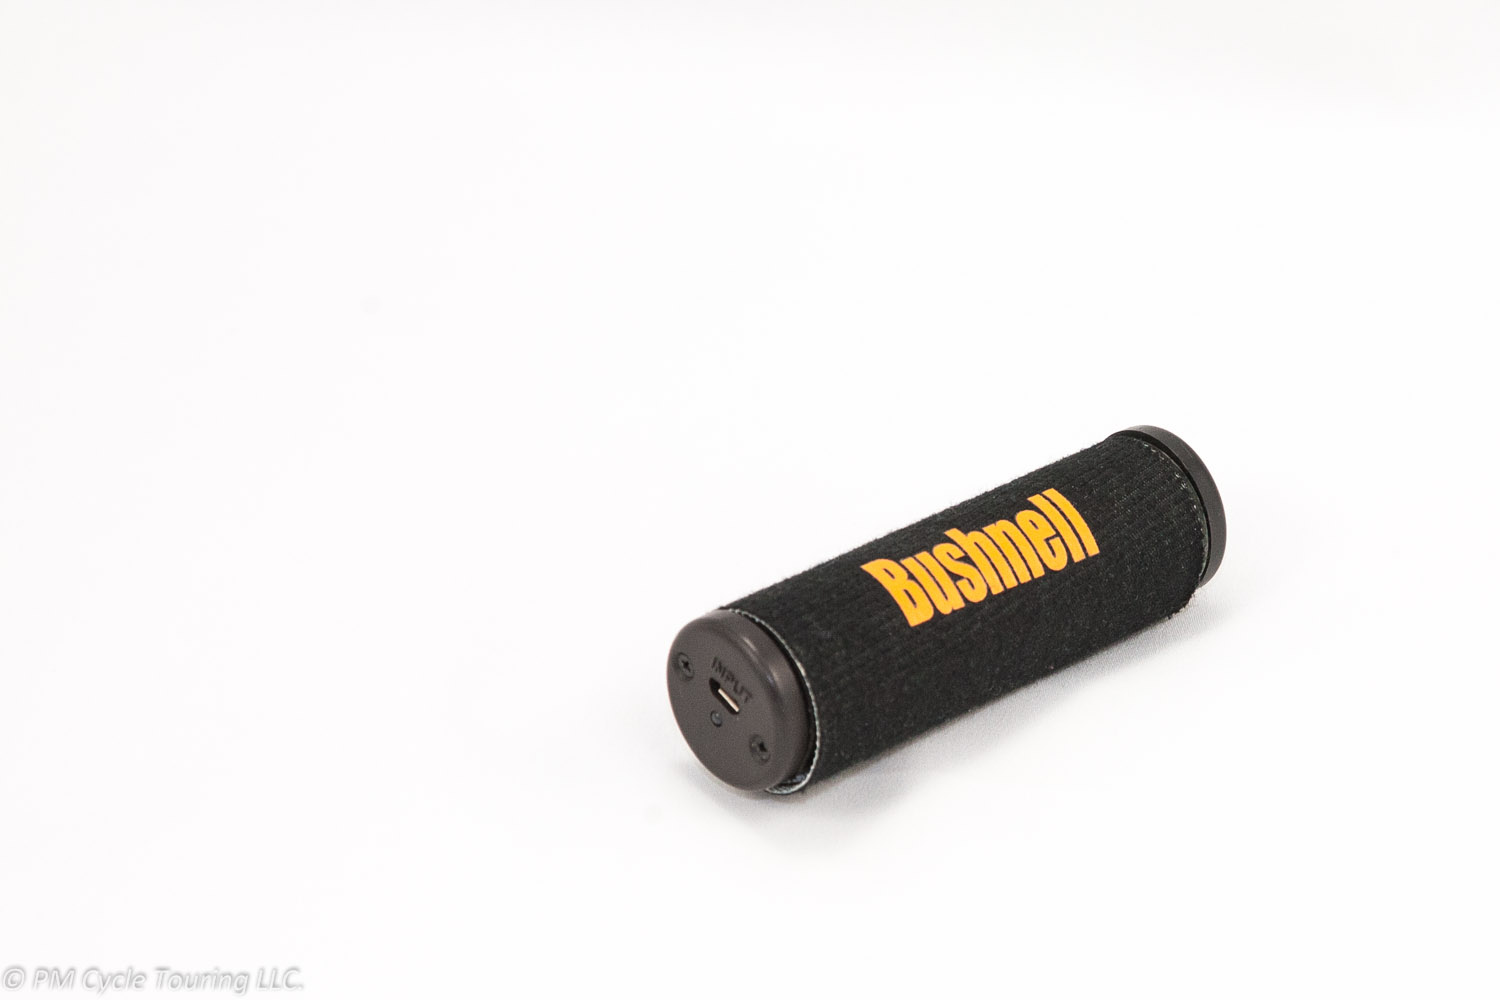 Rolled up Bushnell Solar Mini Wrap